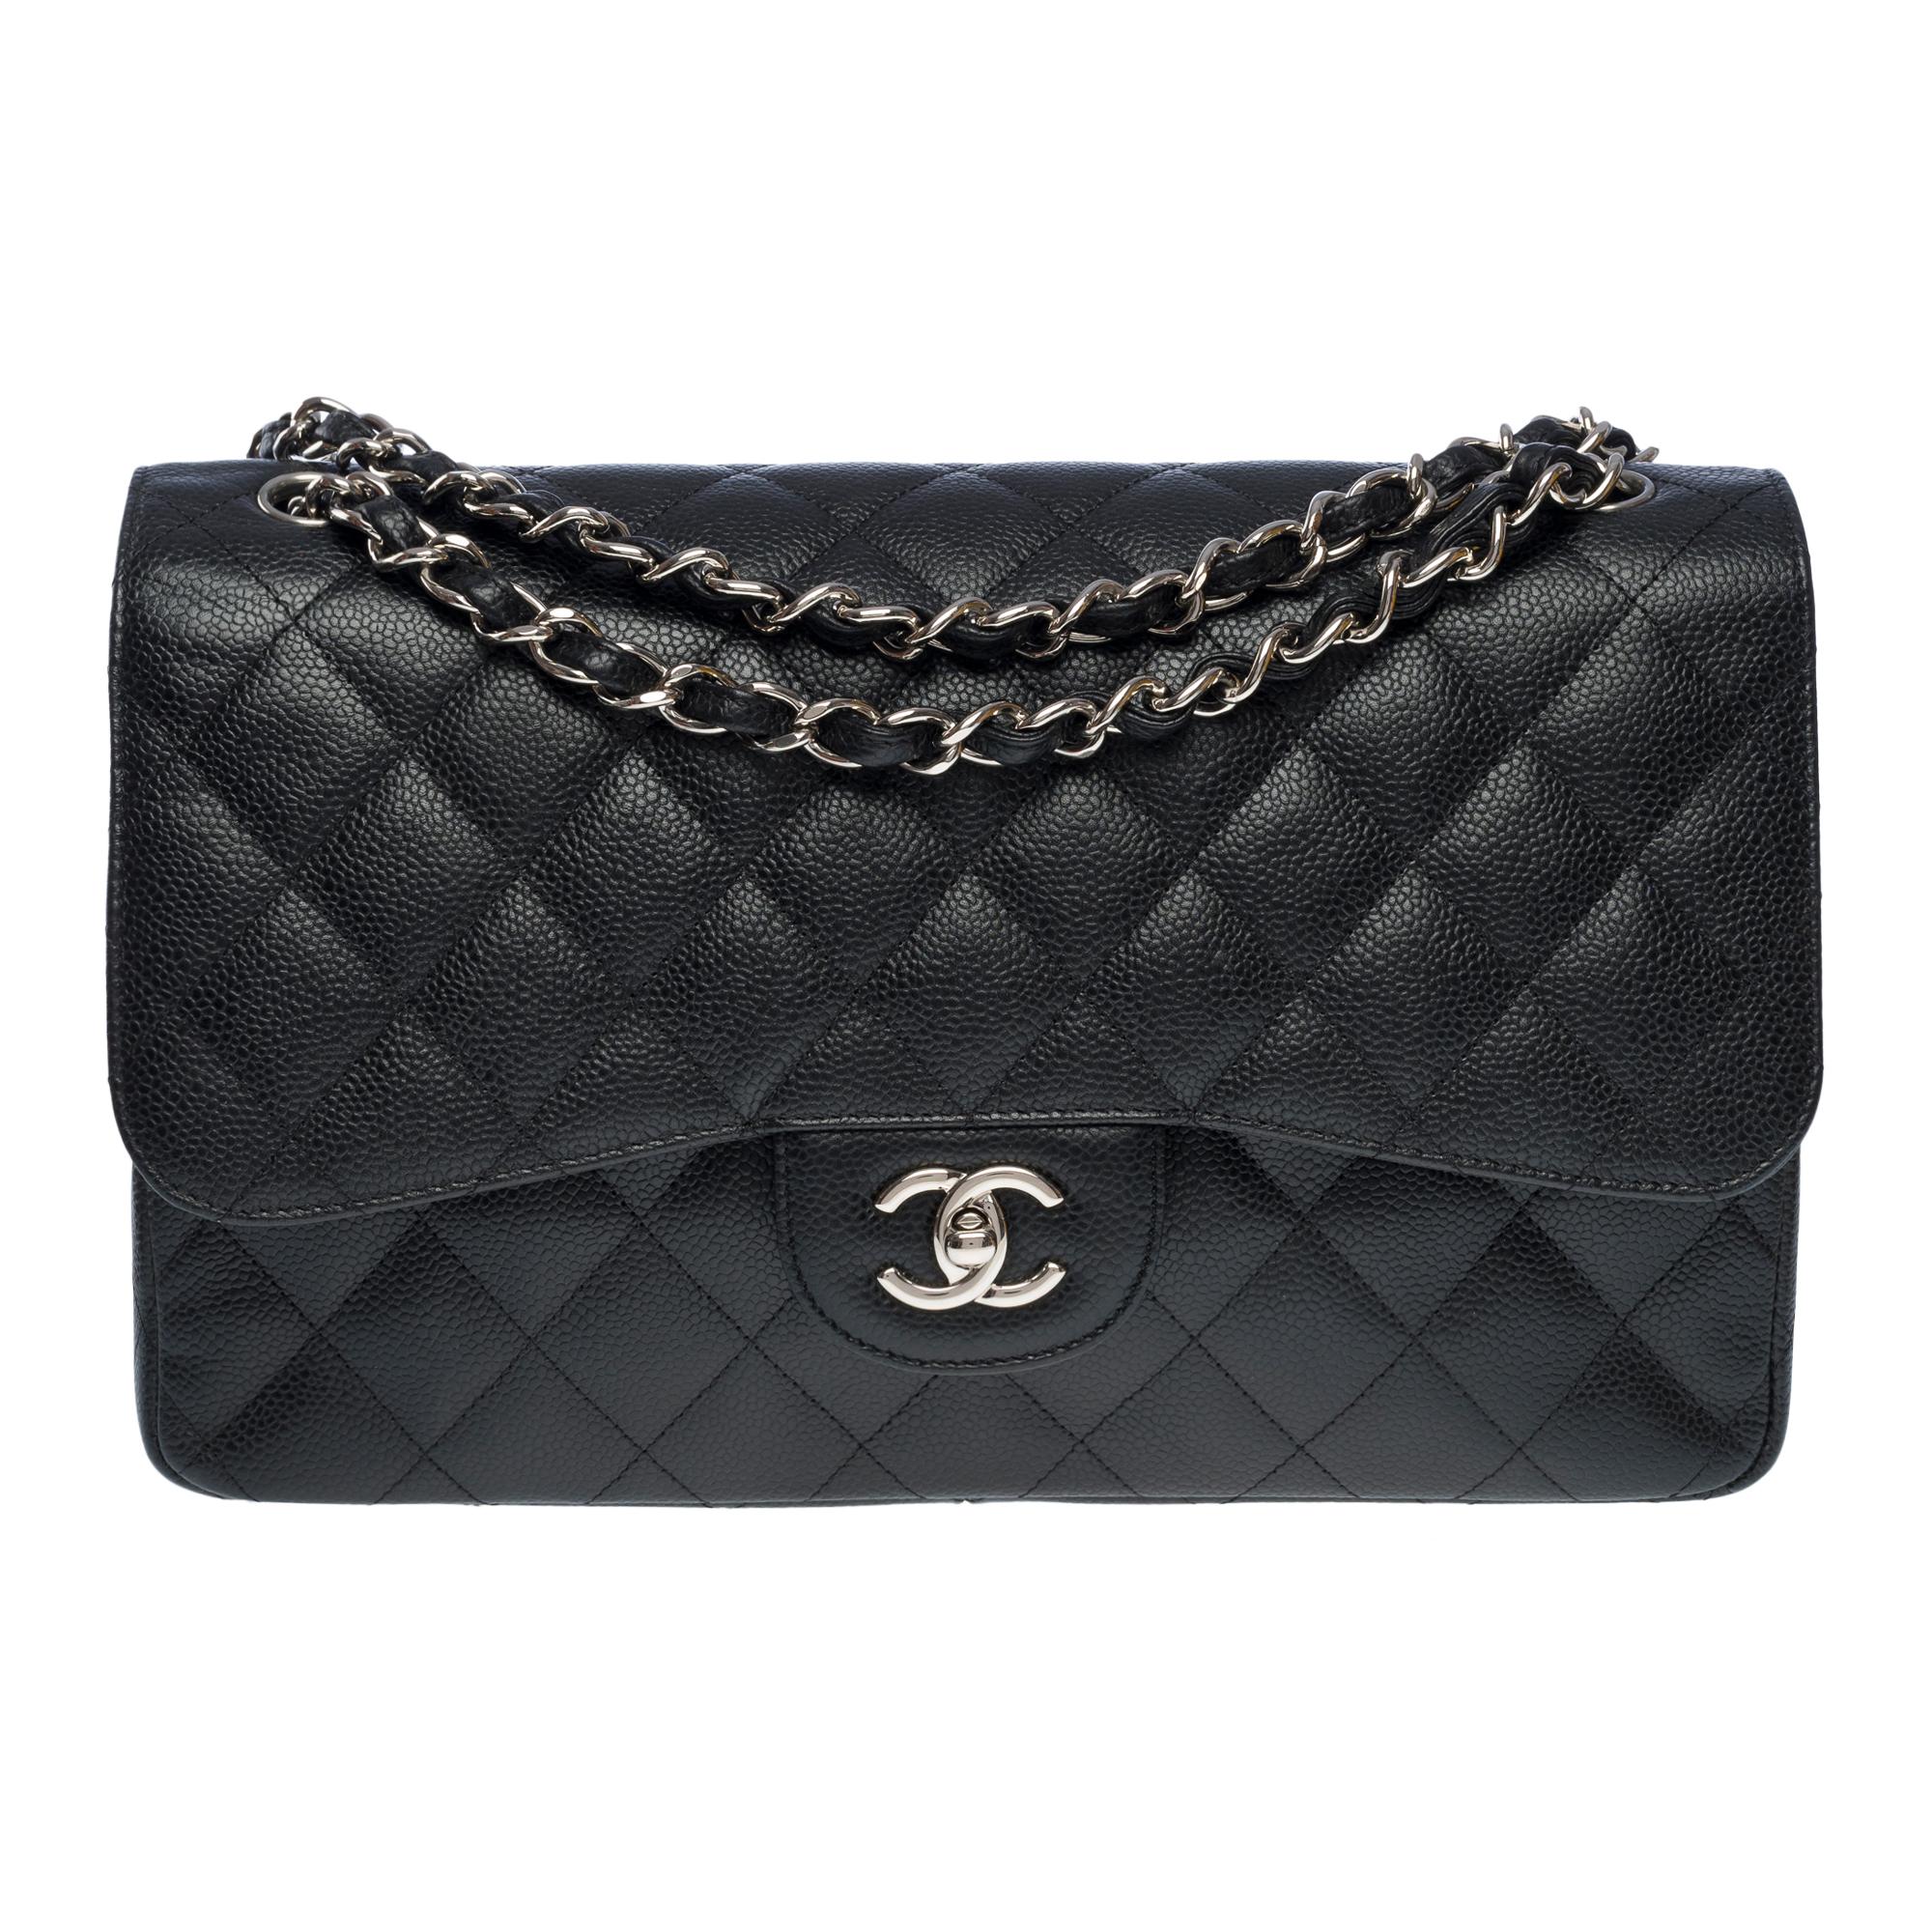 Exceptional Chanel Timeless Jumbo double flap shoulder bag in black caviar quilted leather, silver metal hardware, a chain-handle in silver interlaced with black caviar leather for a hand and shoulder carry

A patch pocket on the back of the